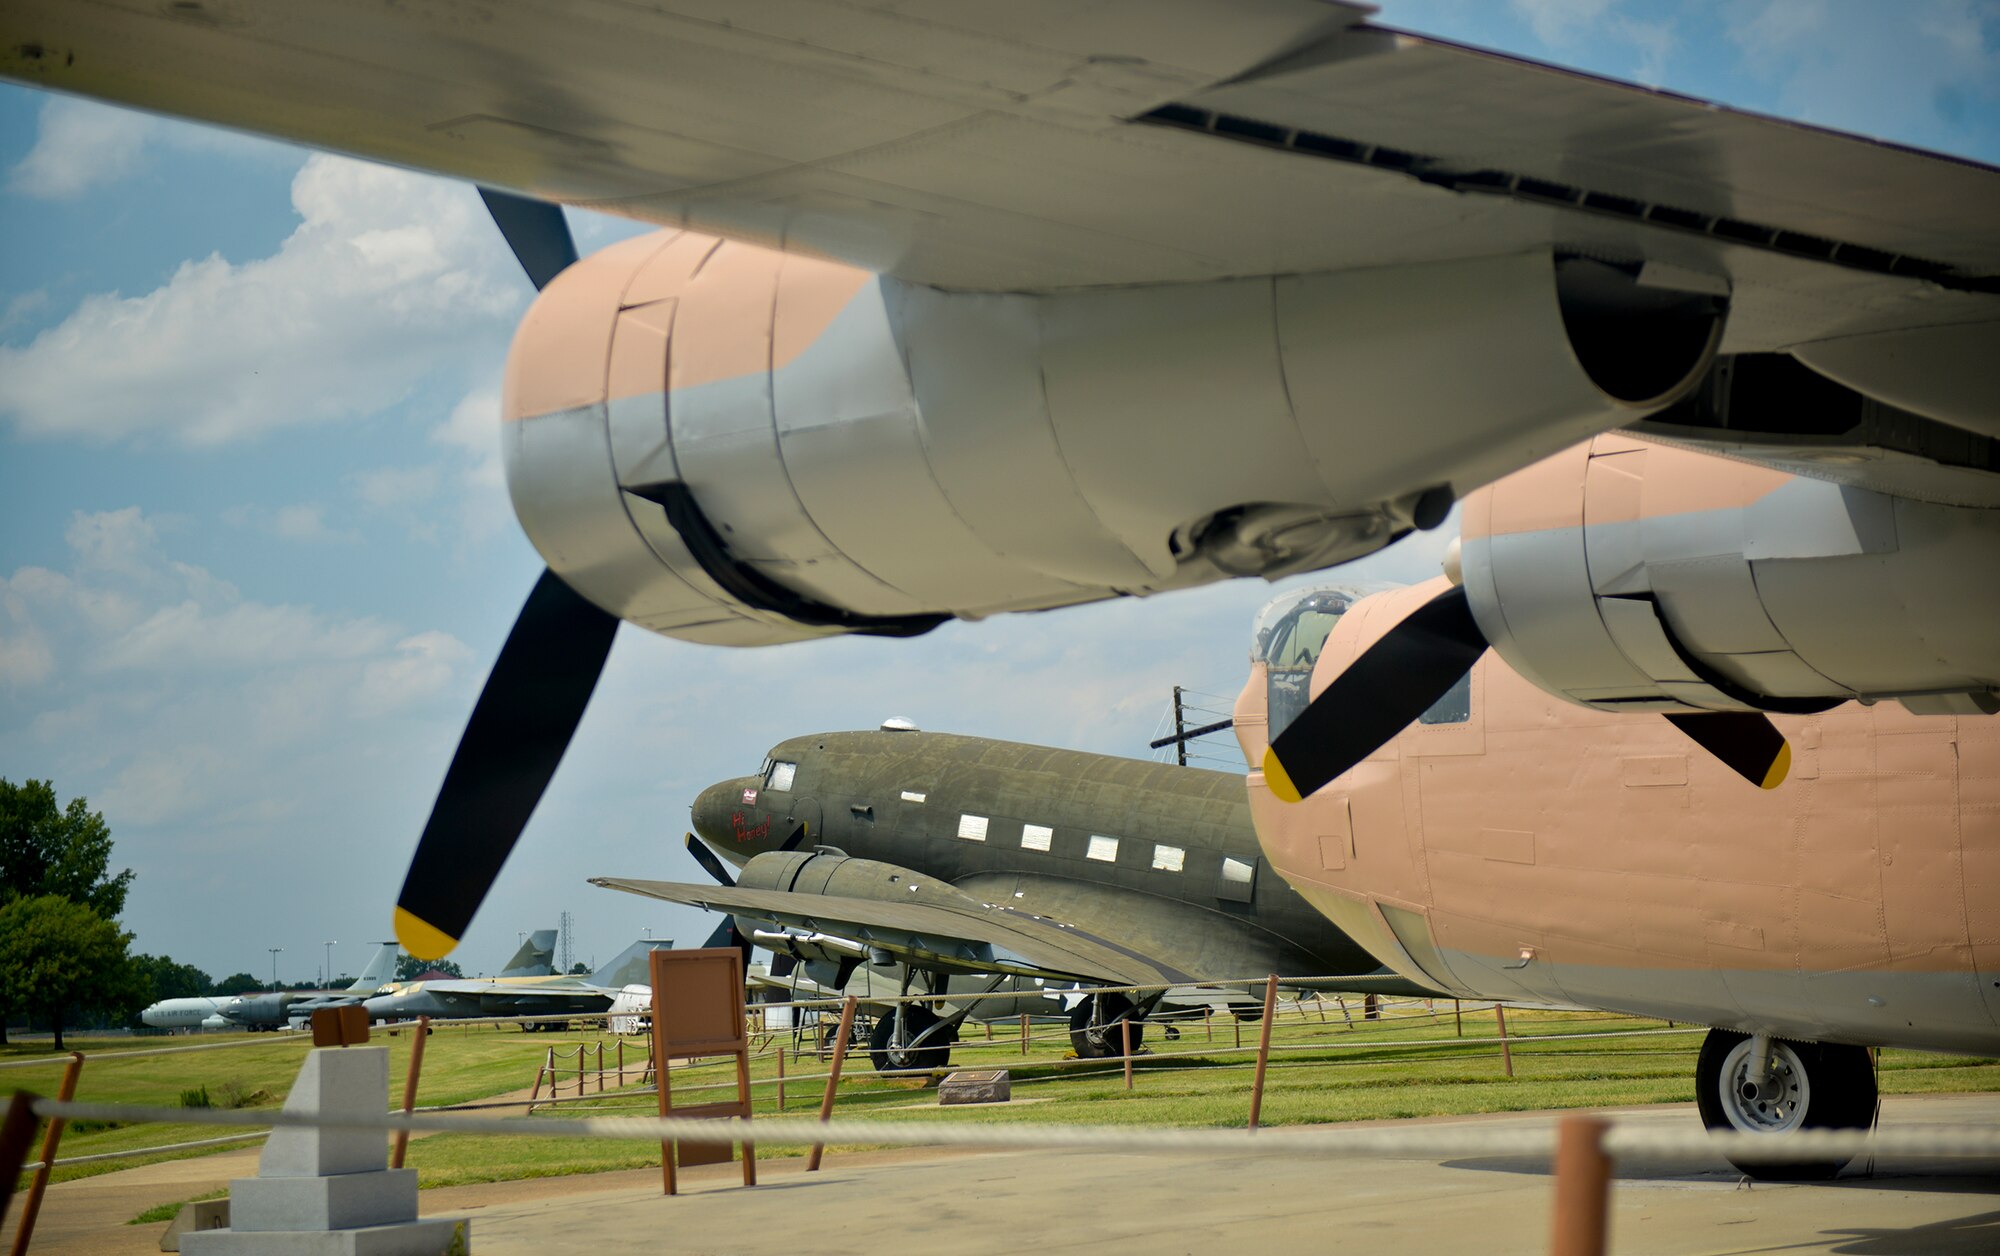 The air park at the Barksdale Global Power Museum features a total of 20 static displays, including 17 aircraft that span from a World War II B-24 Liberator to an SR-71 Blackbird. (U.S. Air Force photo/Airman 1st Class Mozer O. Da Cunha)